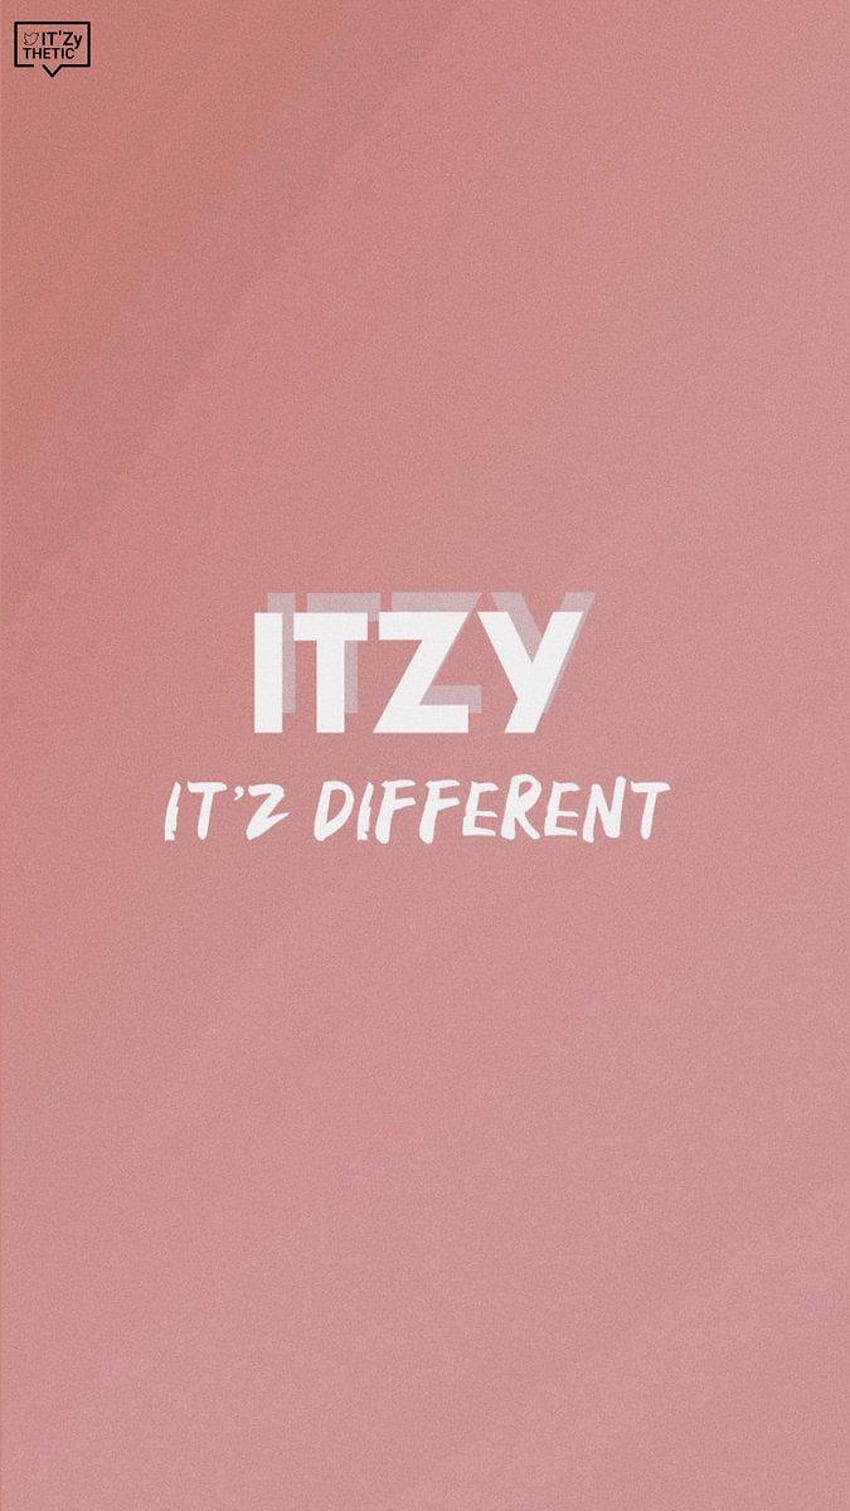 LOGO PNG | ITZY - NOT SHY LOGO PNG by kloorer on DeviantArt